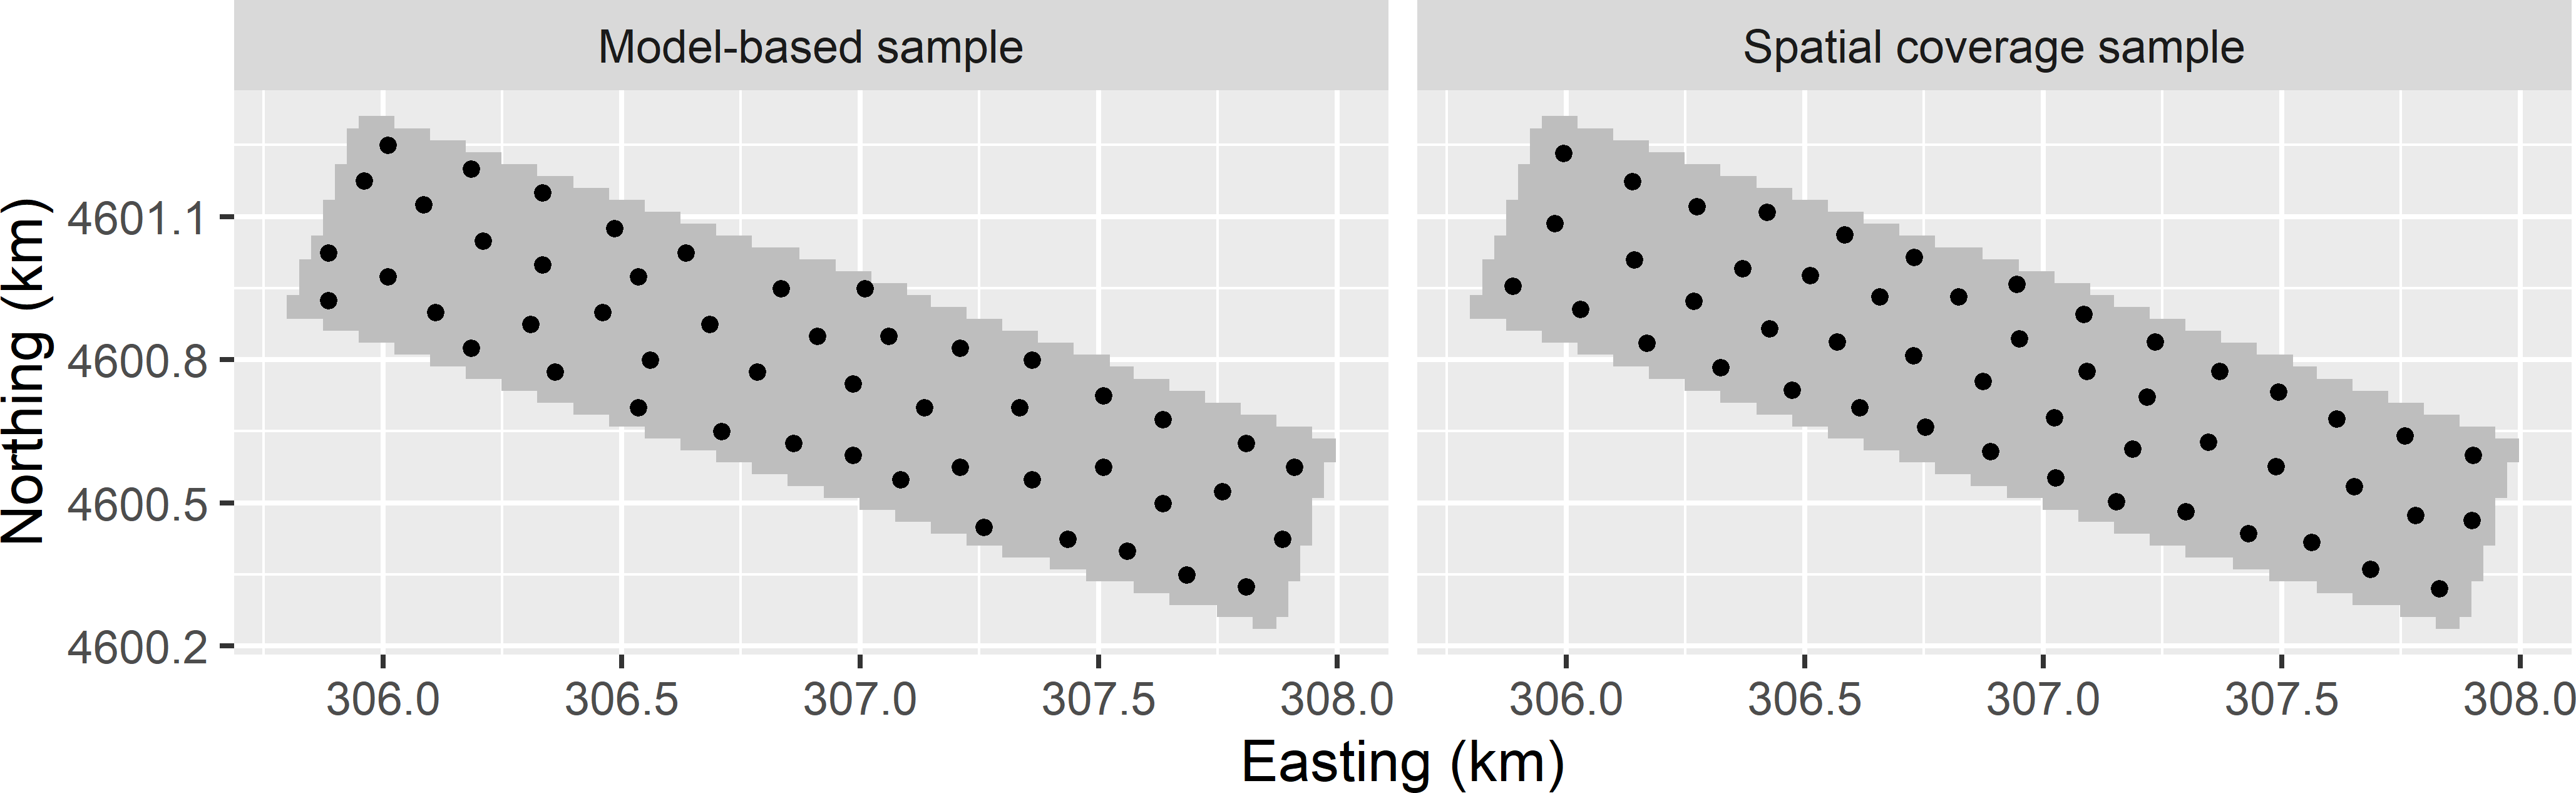 Optimised sampling pattern for the mean variance of OK predictions of lnECe (model-based sample) and spatial coverage sample of the Cotton Research Farm.